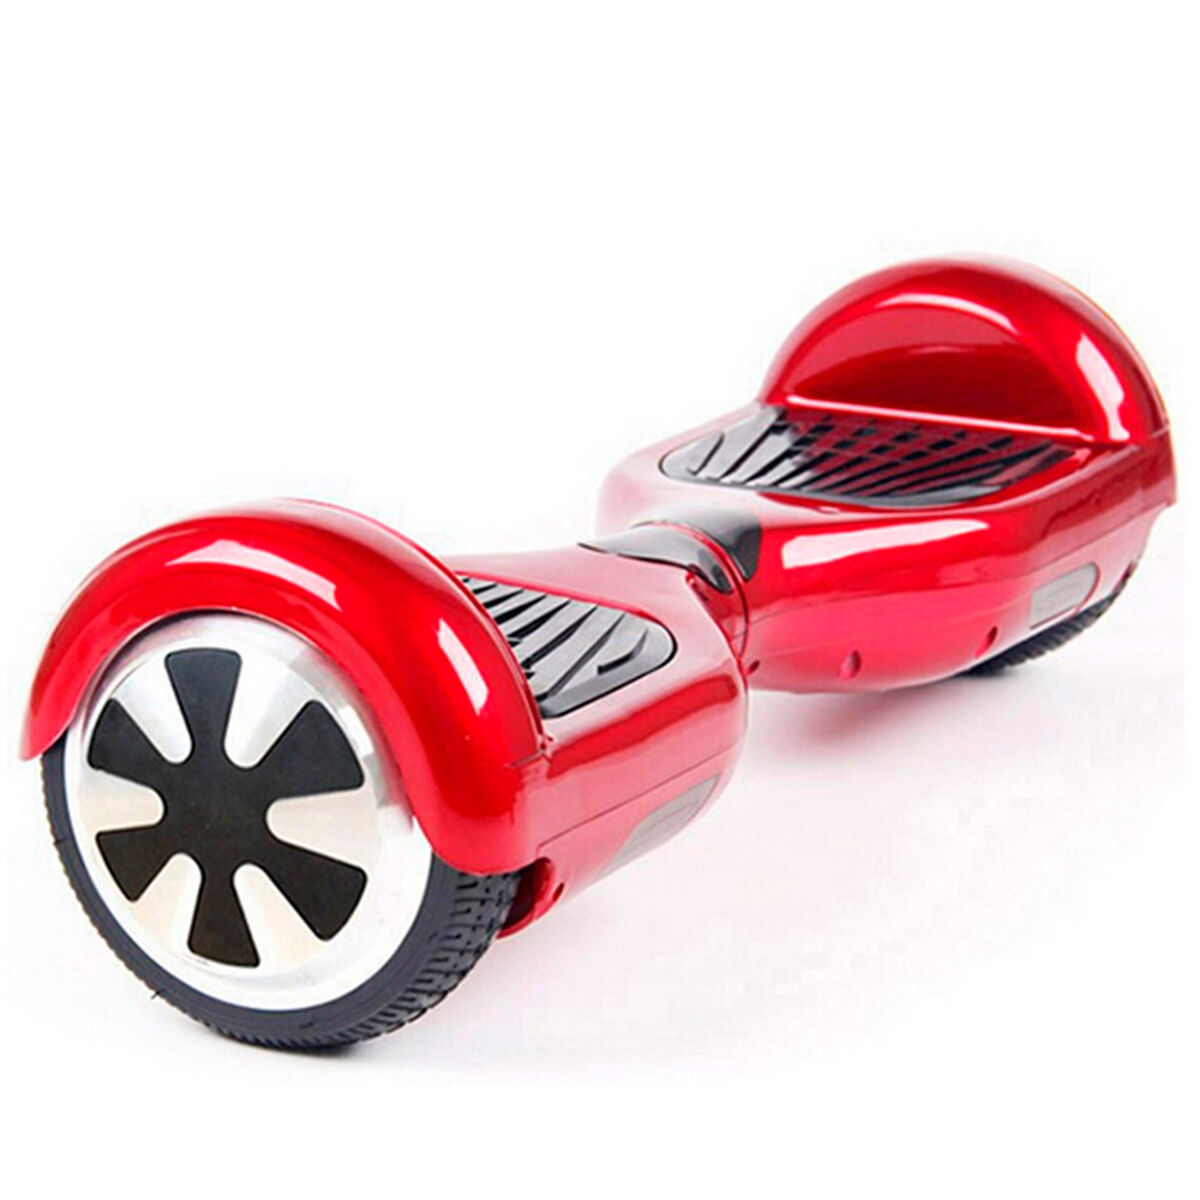 Scooter Eléctrico Hoverboard Introtech Smart Balance Wheel